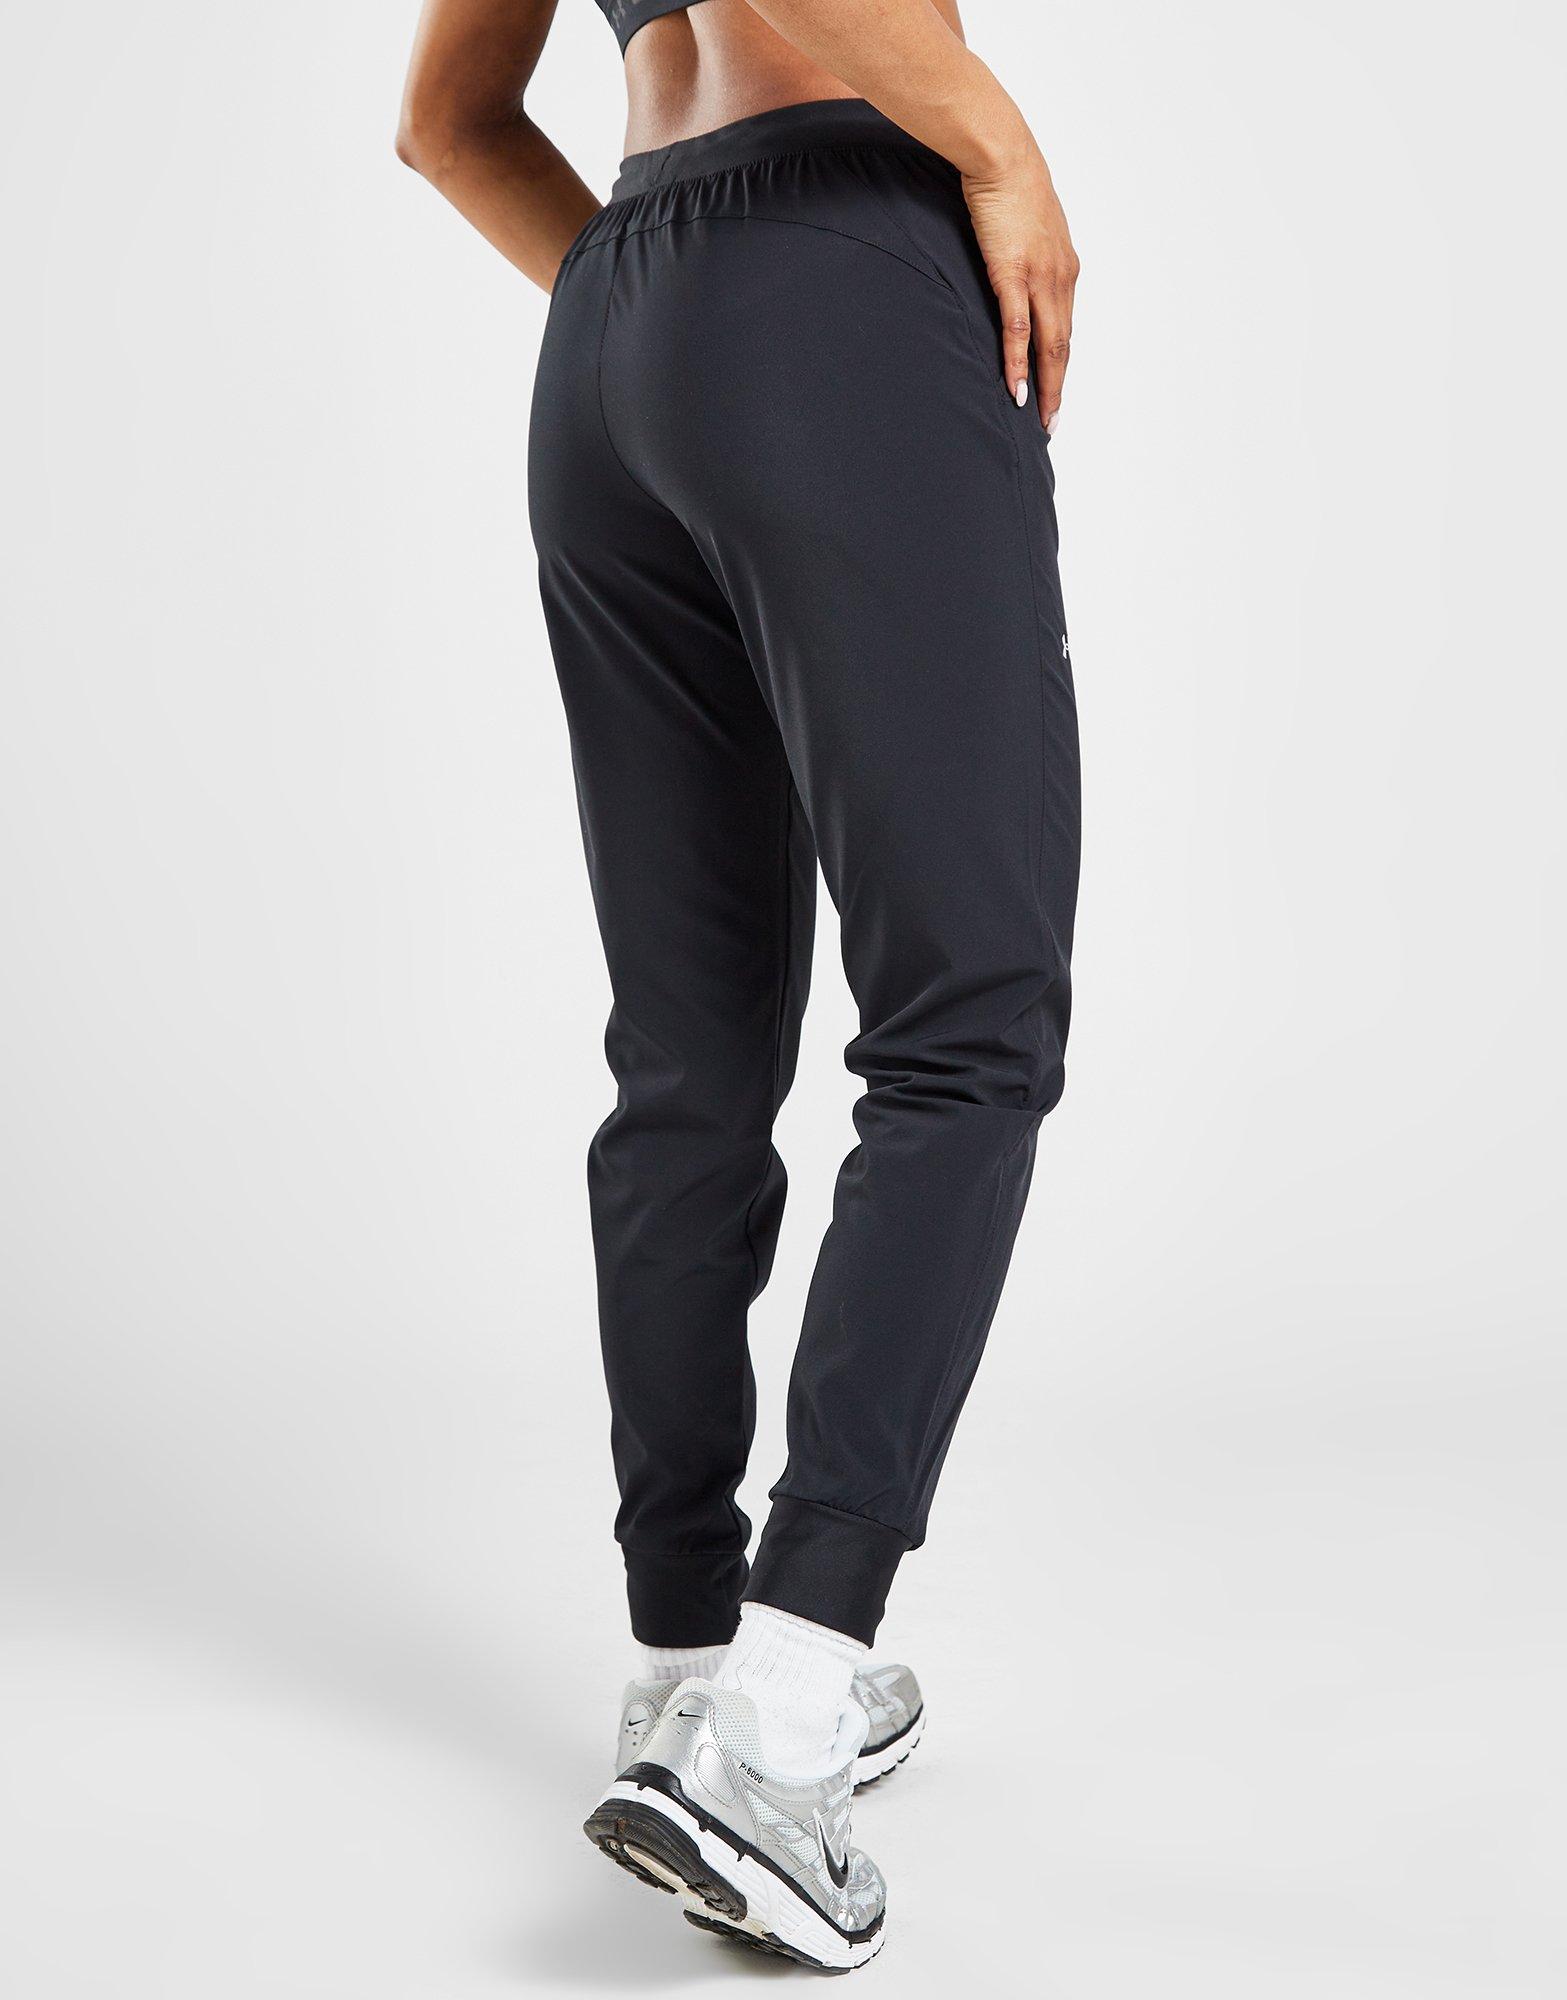 Black Under Armour UA Armour Sport Woven Track Pants - JD Sports Global